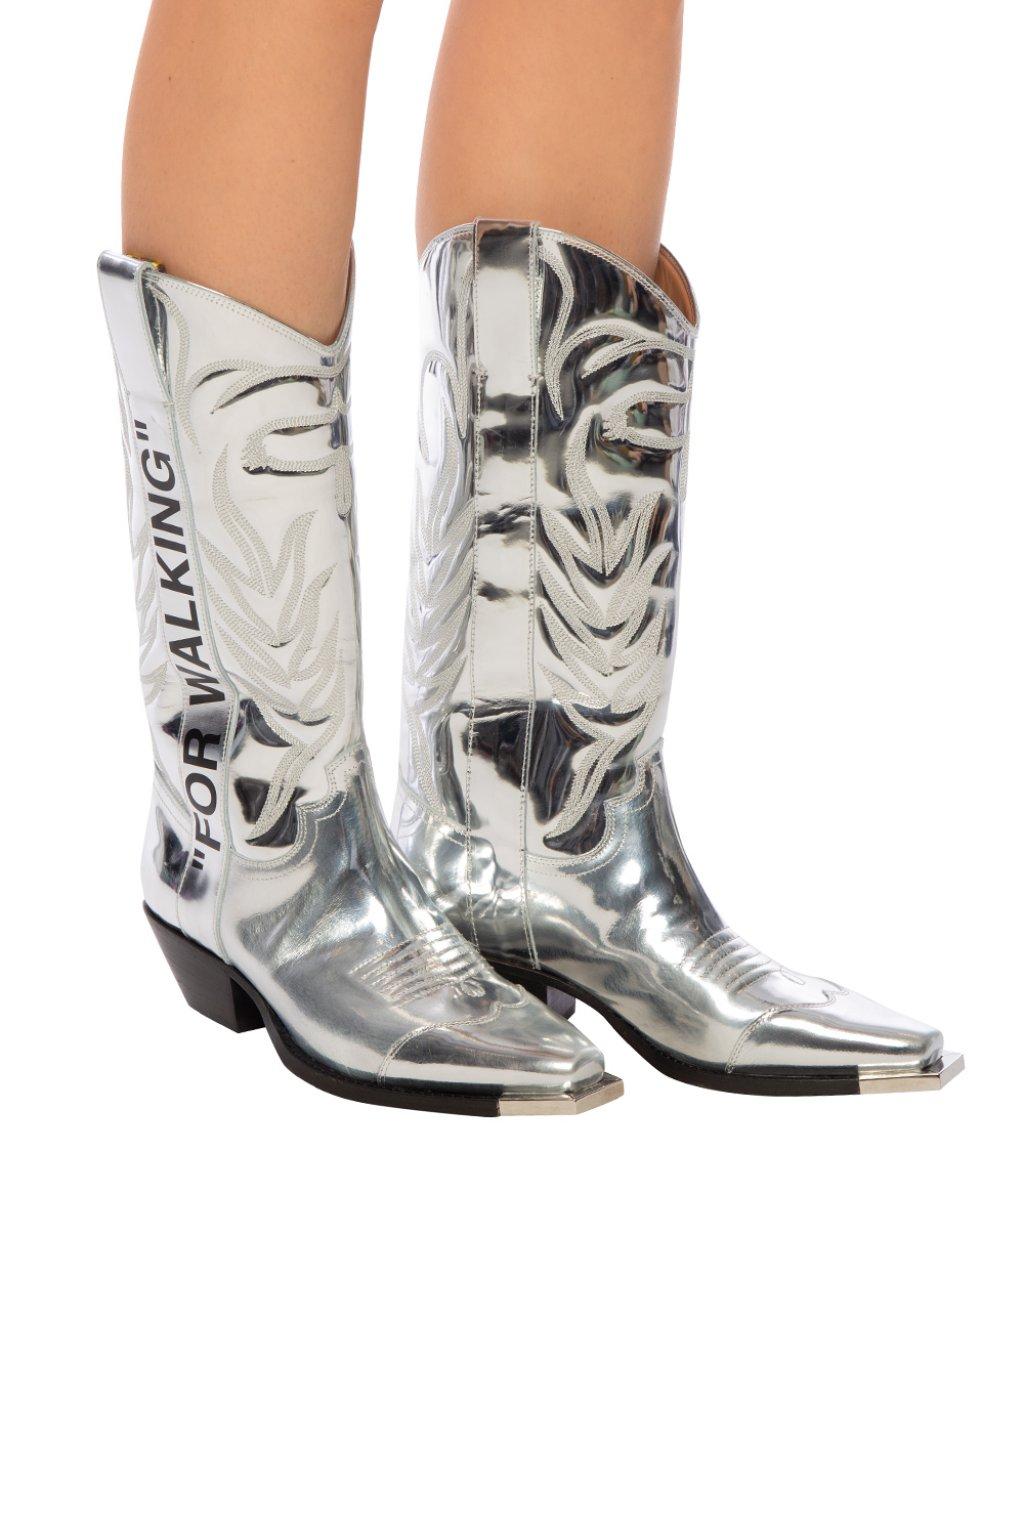 Off-White c/o Virgil Abloh Leather Heeled Knee-high Boots in Silver ...